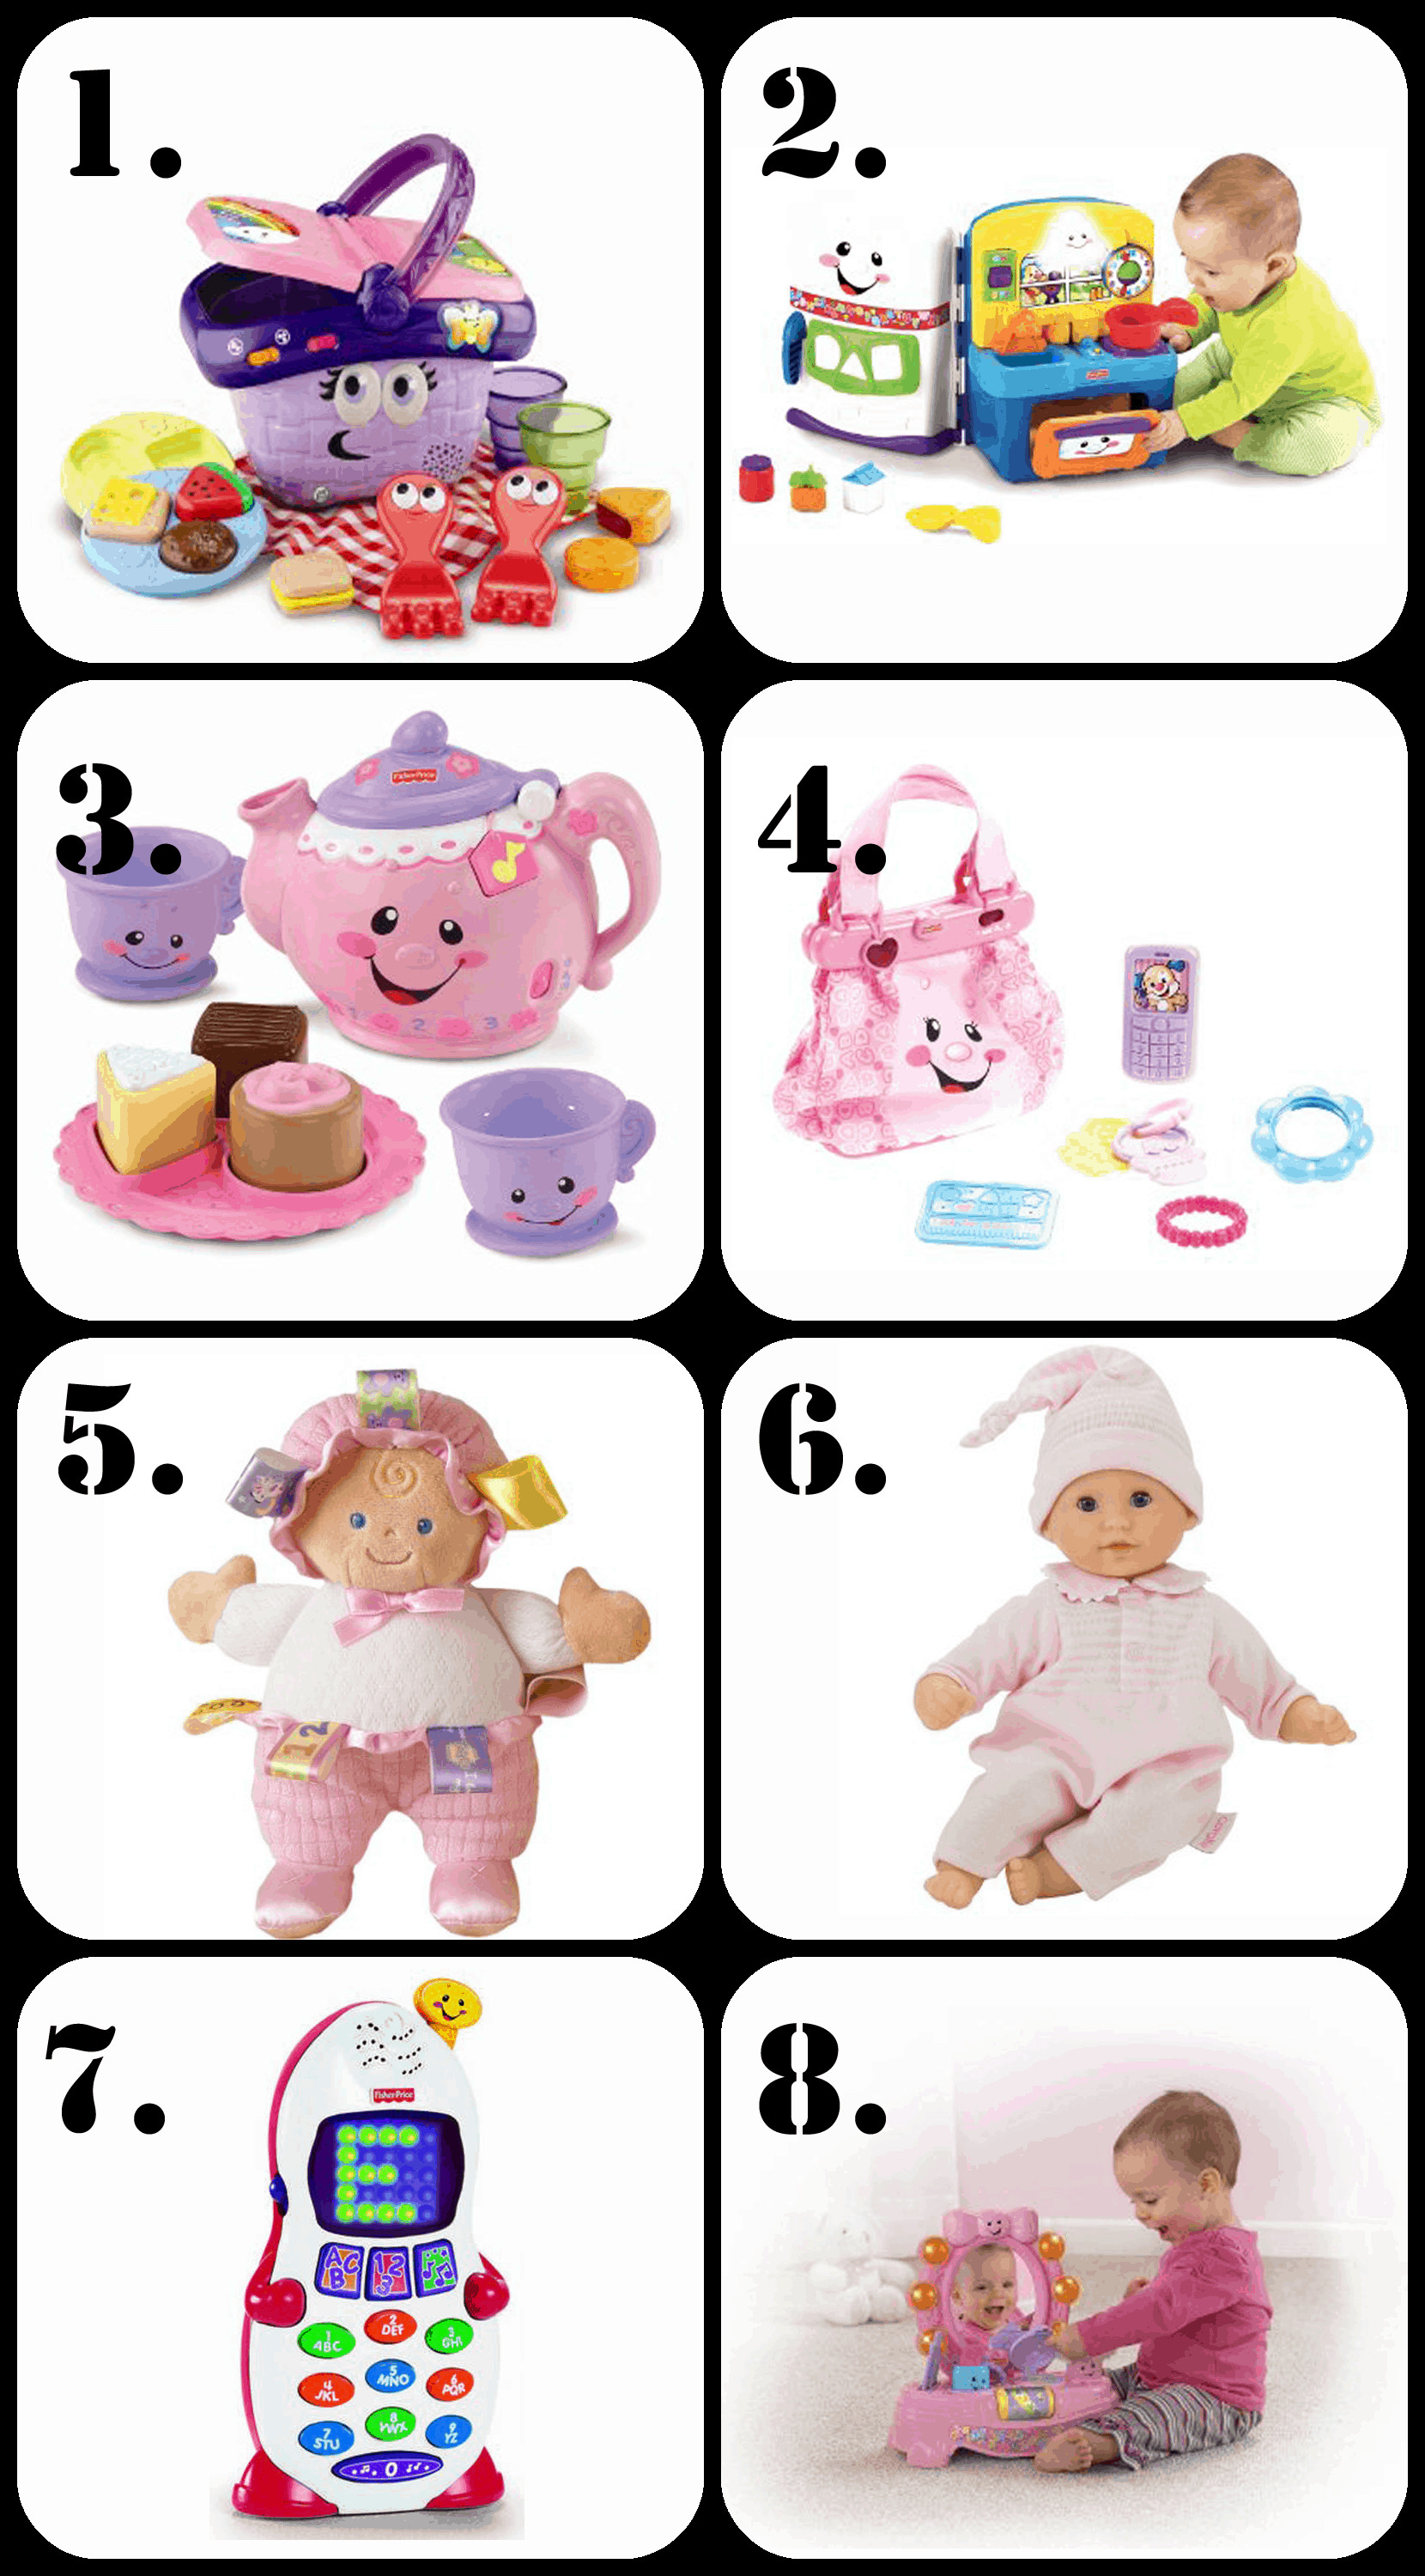 Best 1St Birthday Gifts For Girl
 The Ultimate List of Gift Ideas for a 1 Year Old Girl